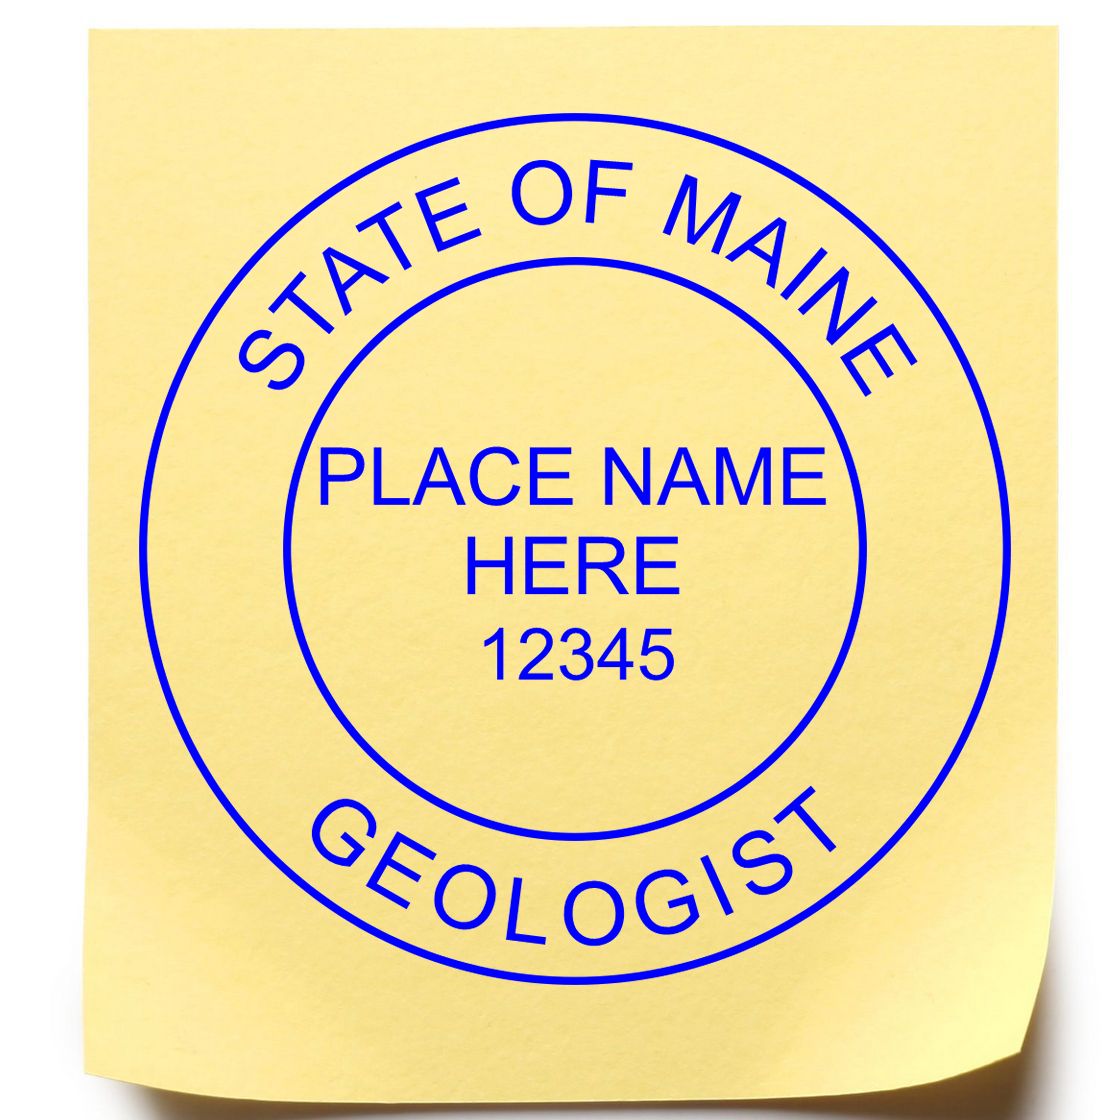 This paper is stamped with a sample imprint of the Self-Inking Maine Geologist Stamp, signifying its quality and reliability.